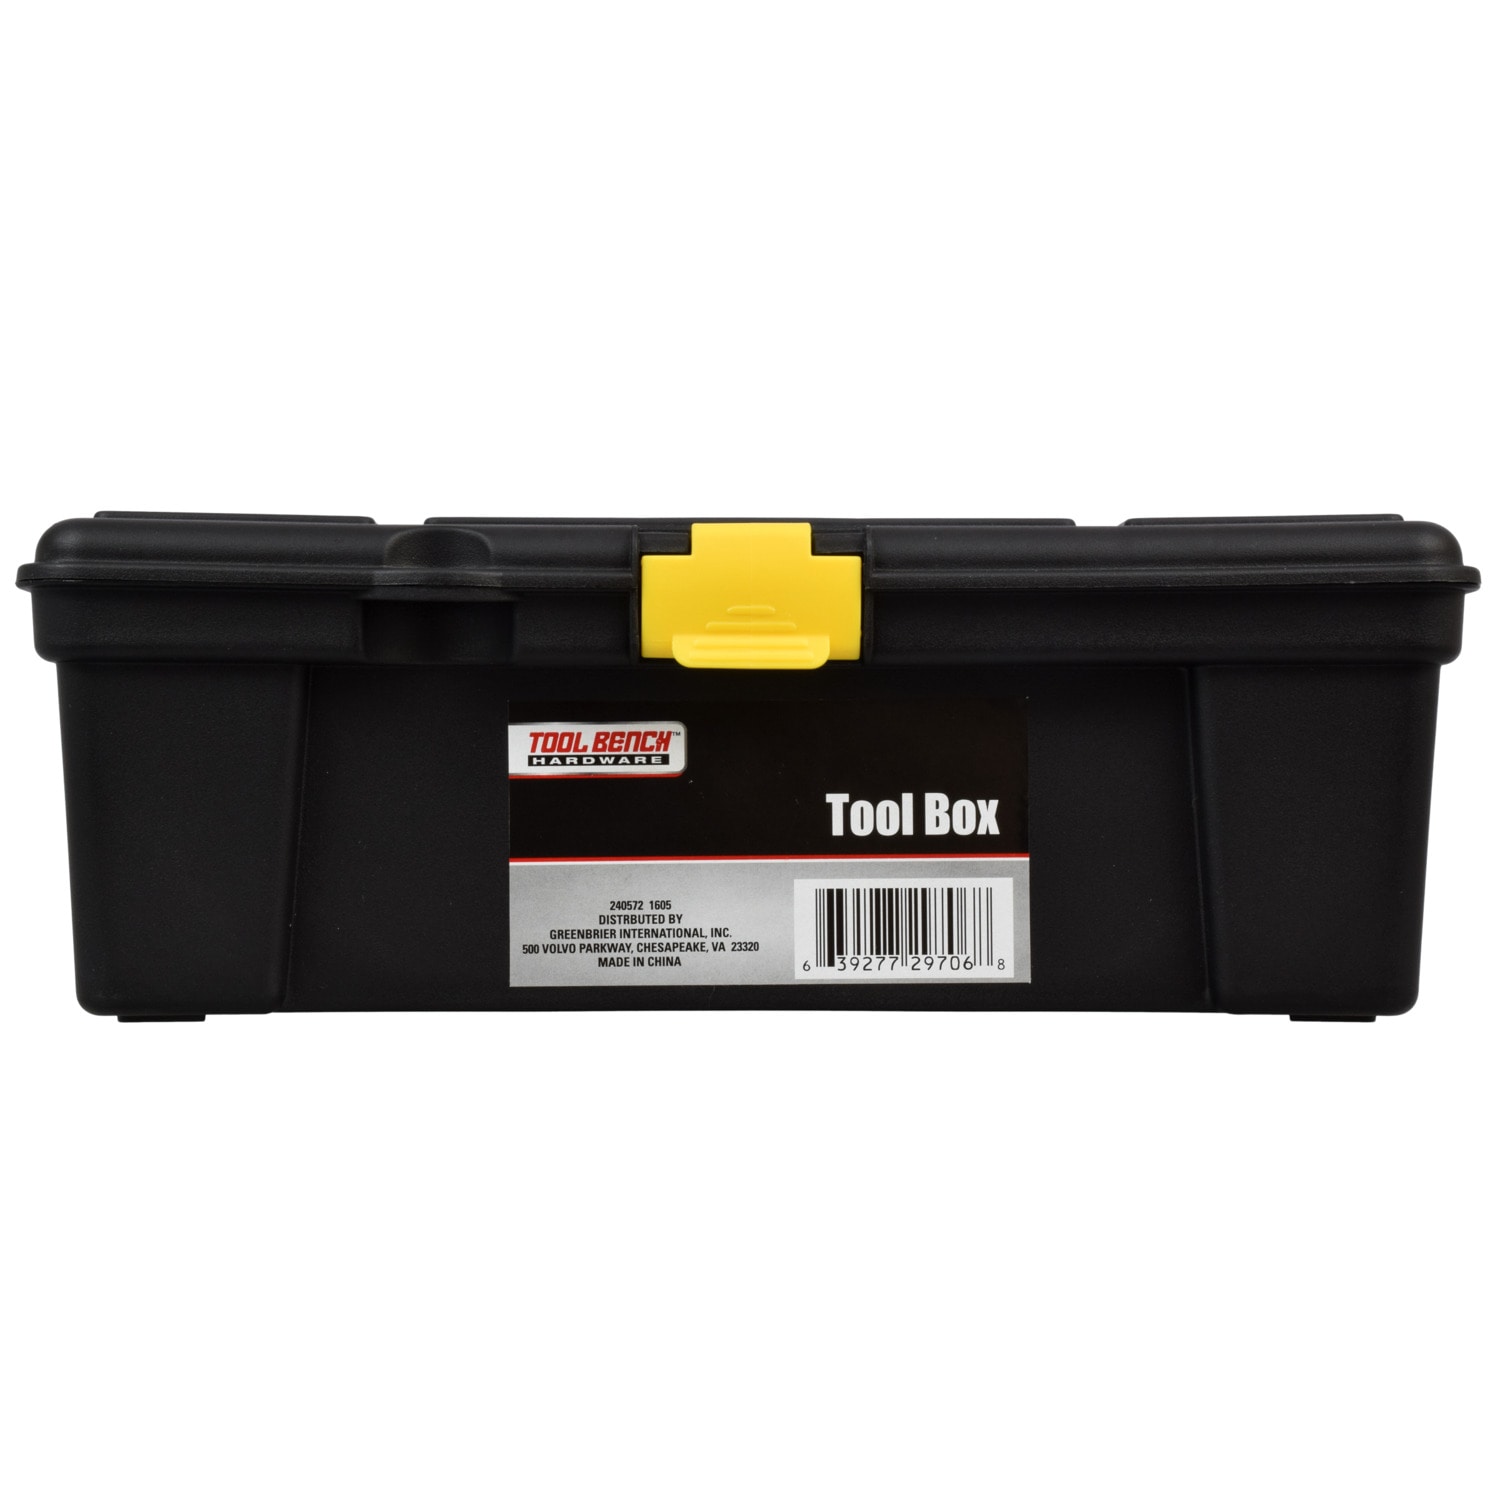 View Tool Bench Hardware Tool Boxes